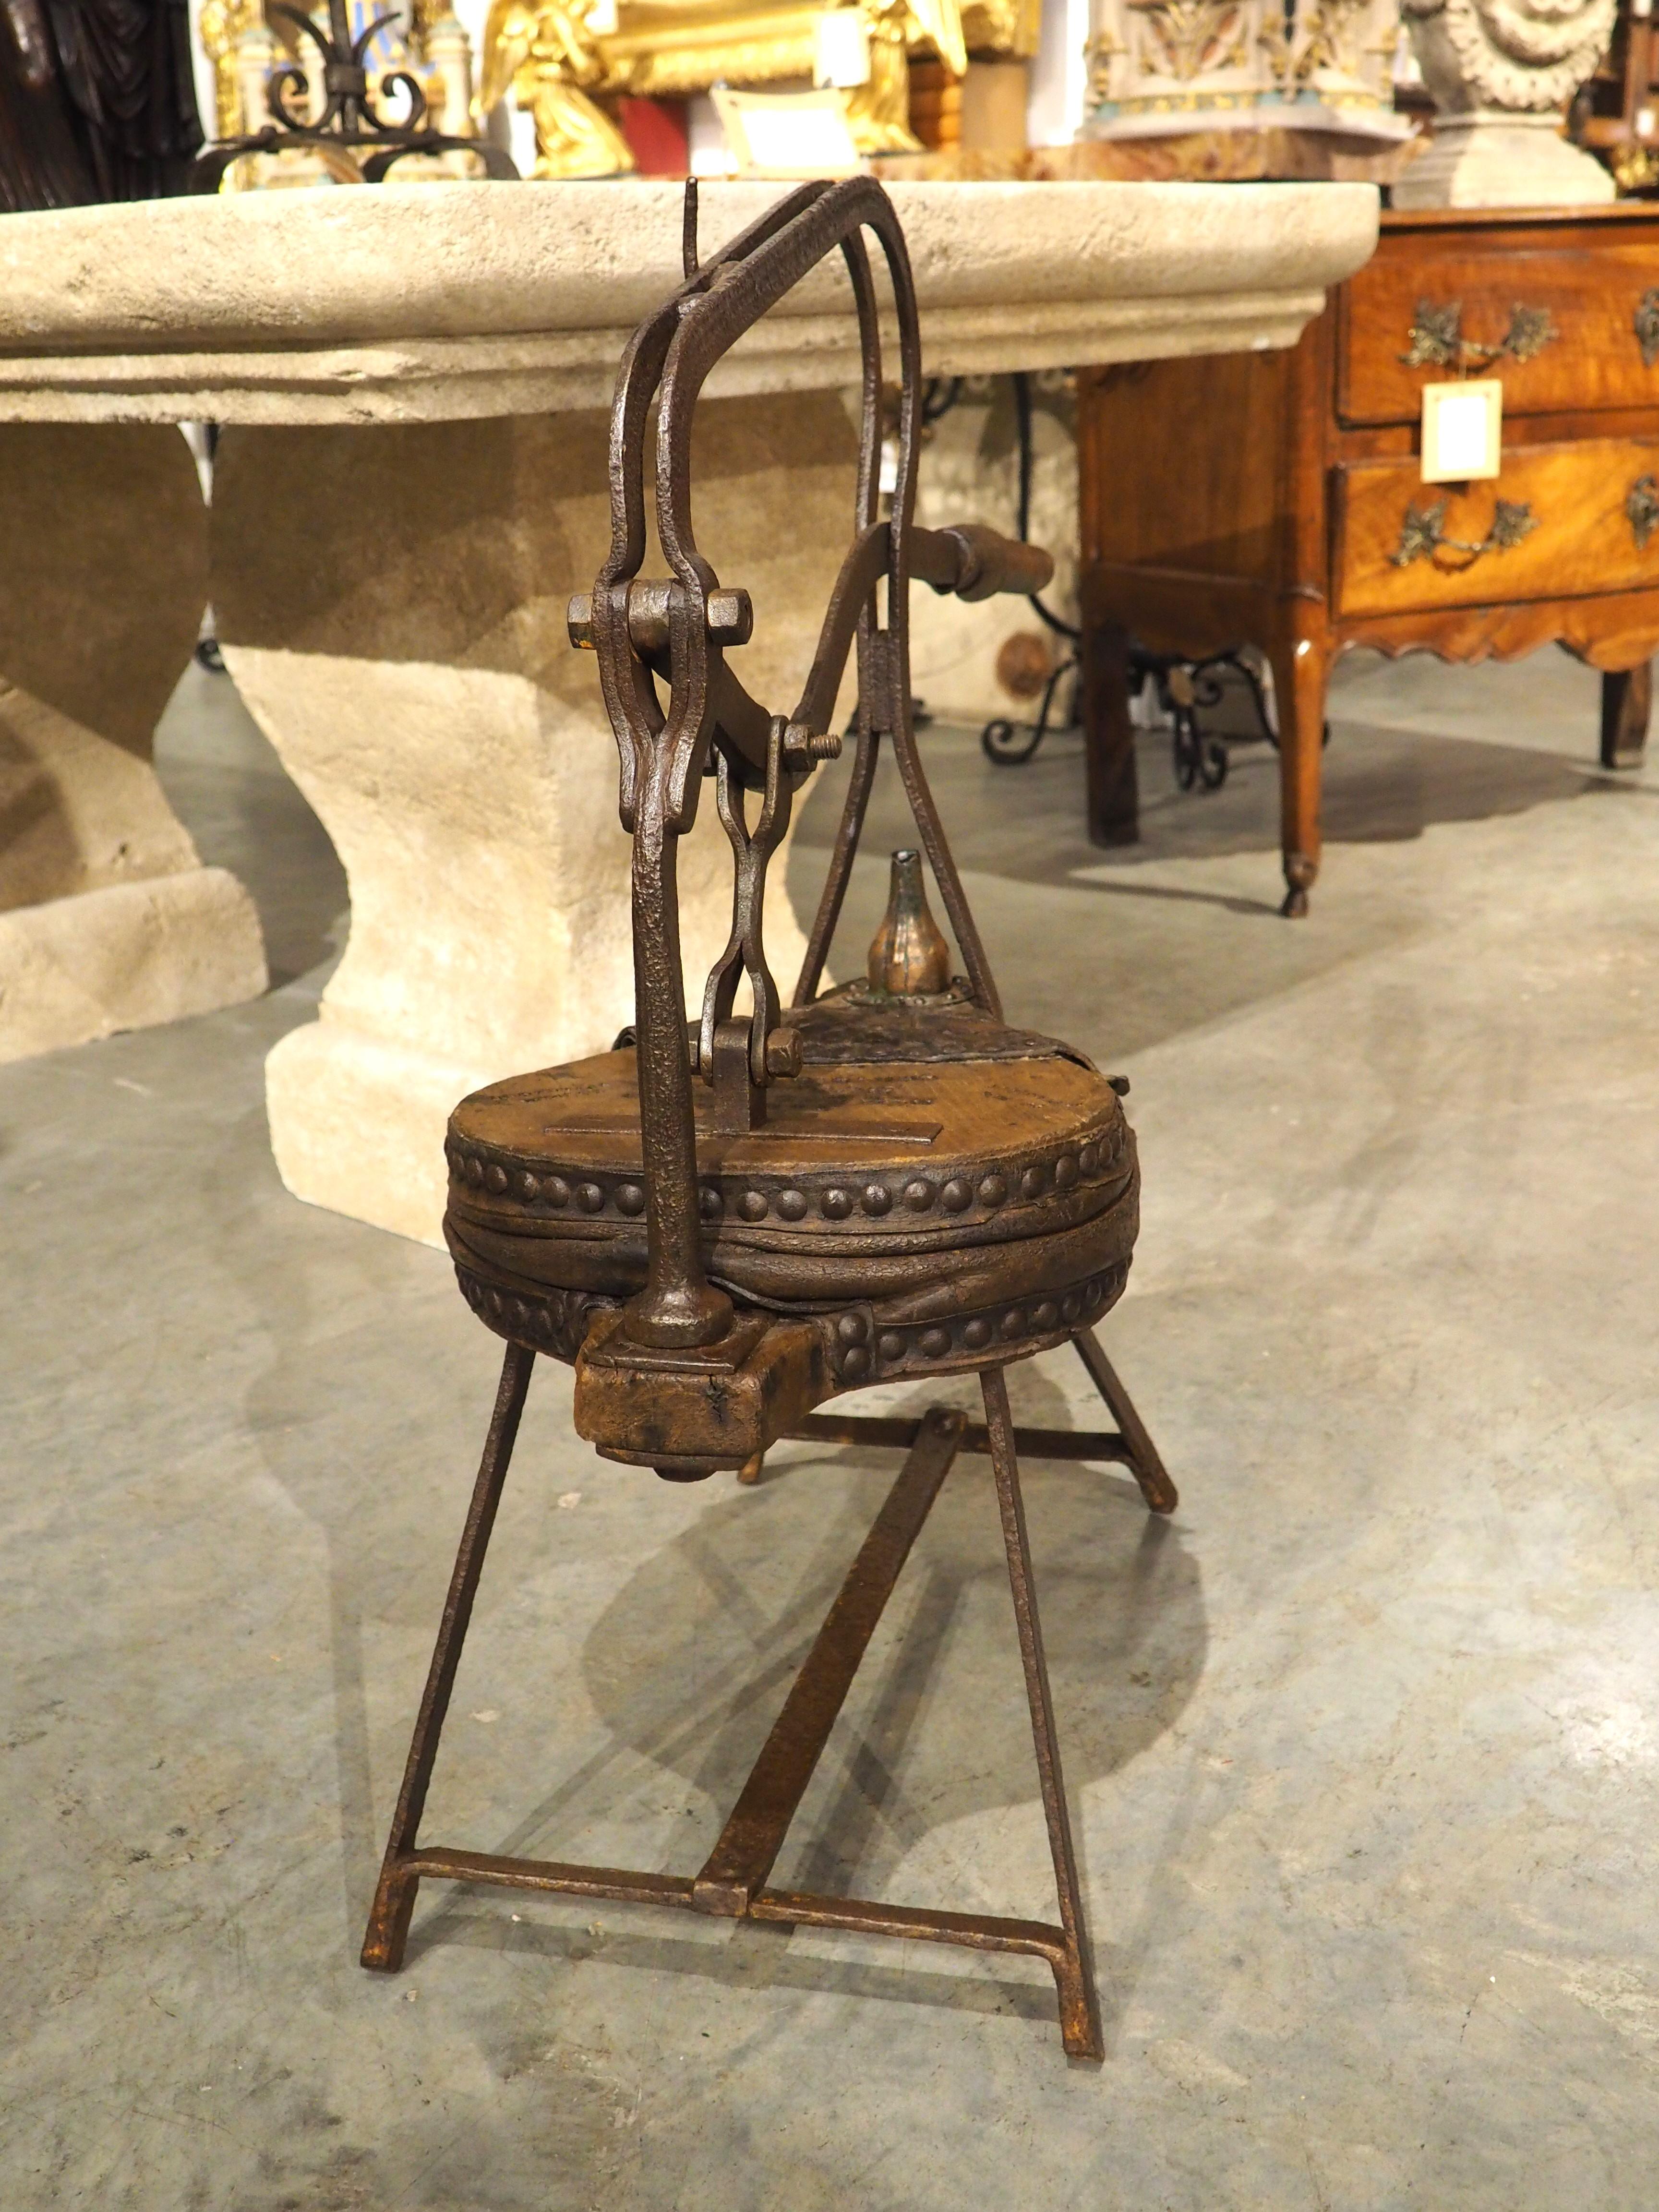 A fascinating 19th-century instrument known in France as a soufflet de barrique, this wrought iron wine bellows was once used at a vineyard in Bordeaux. The wooden bellows is adorned with tanned leather secured by metal nailheads and is mounted to a